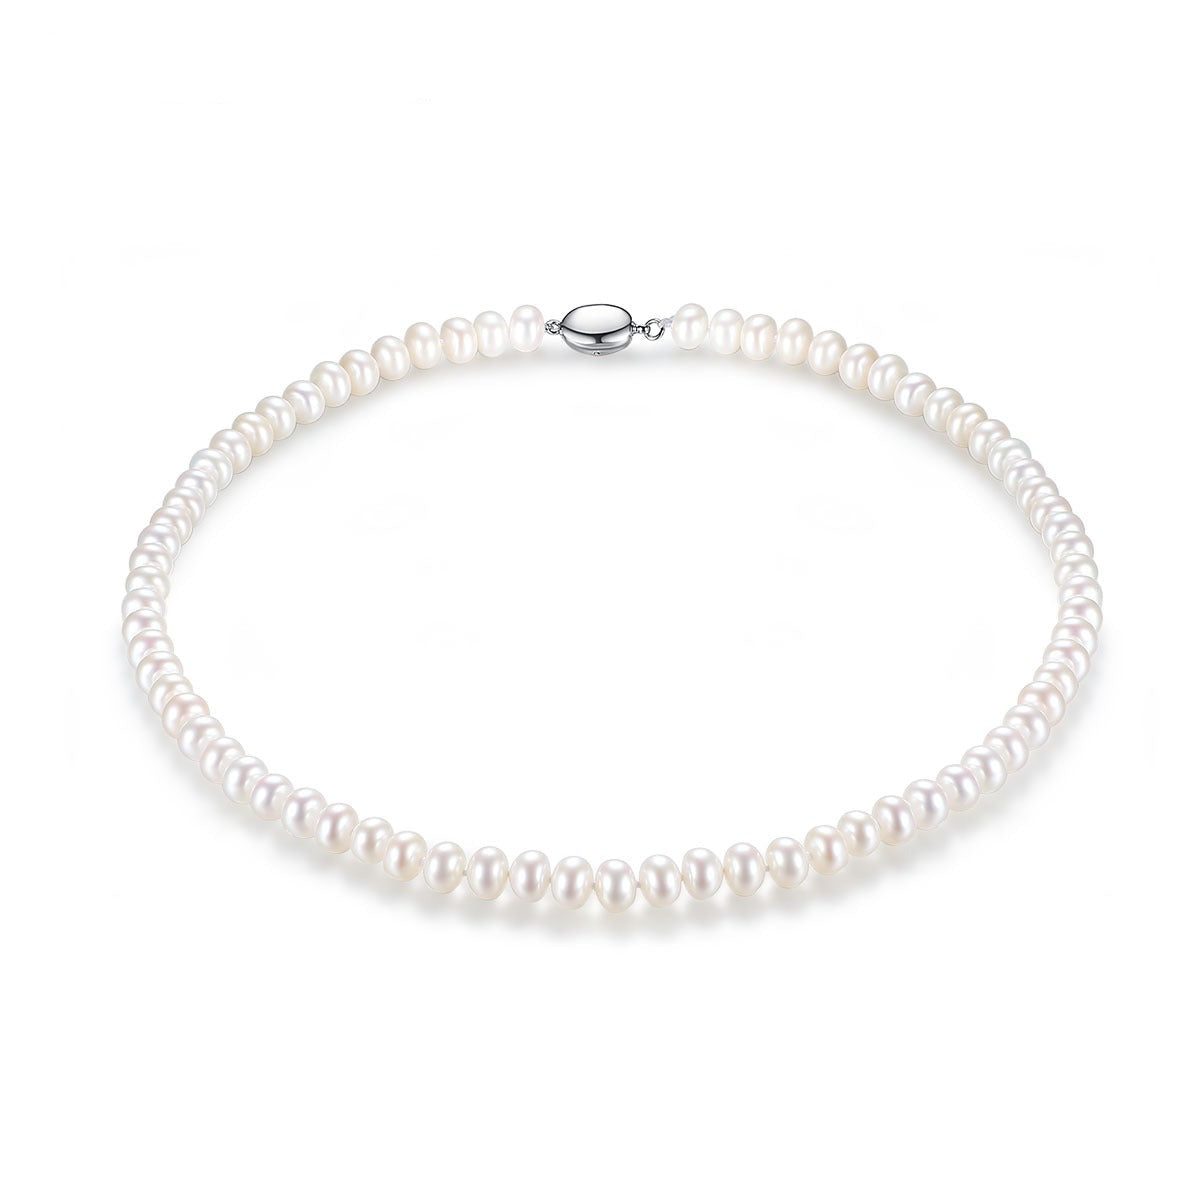 Pearl Collar Necklace - HERS